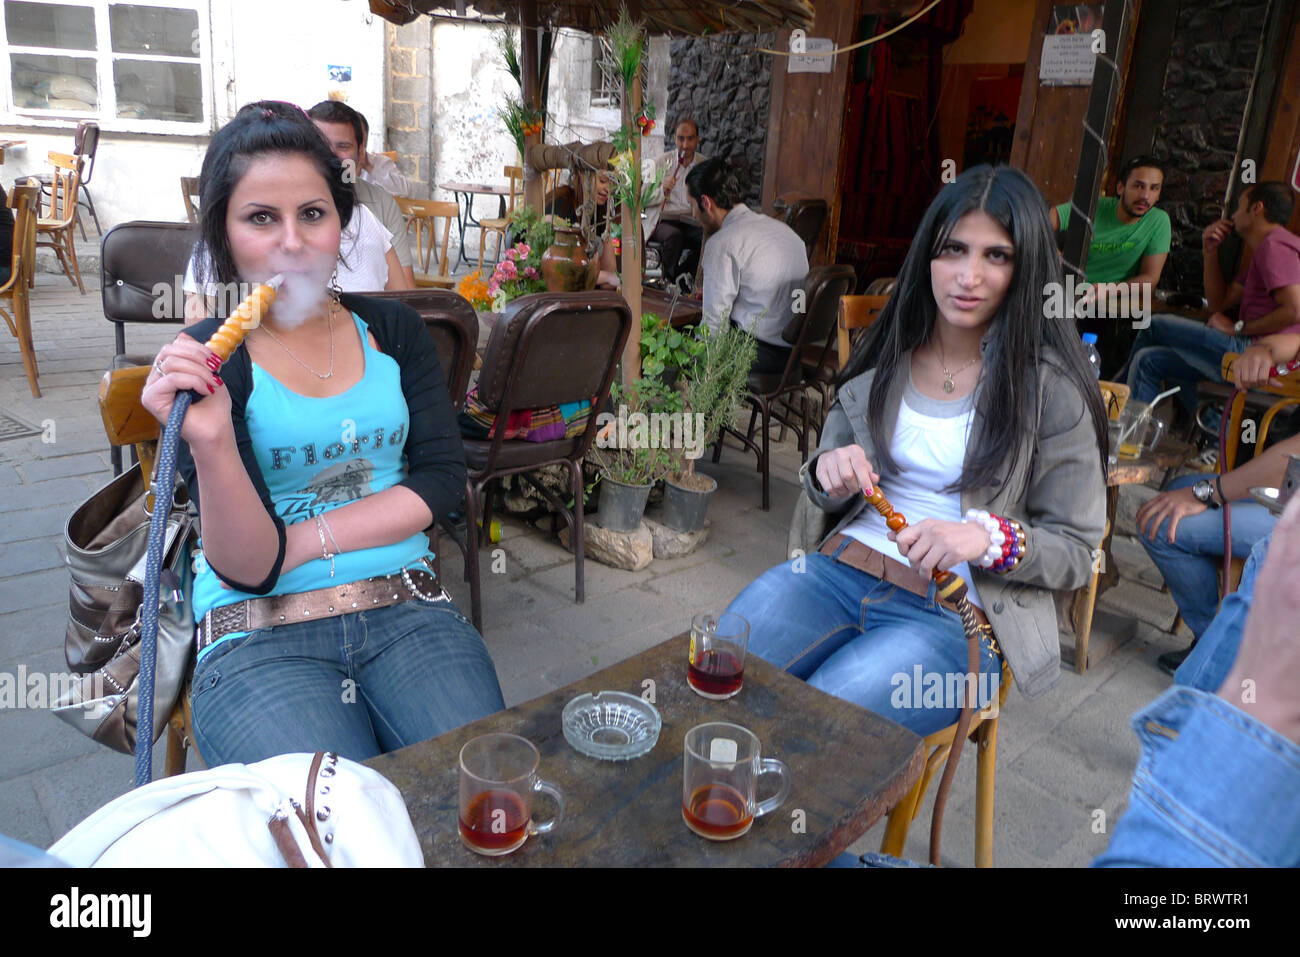 SYRIA Cafe with young women smoking sheesha pies. Damascus. PHOTOGRAPH by Sean Sprague Stock Photo